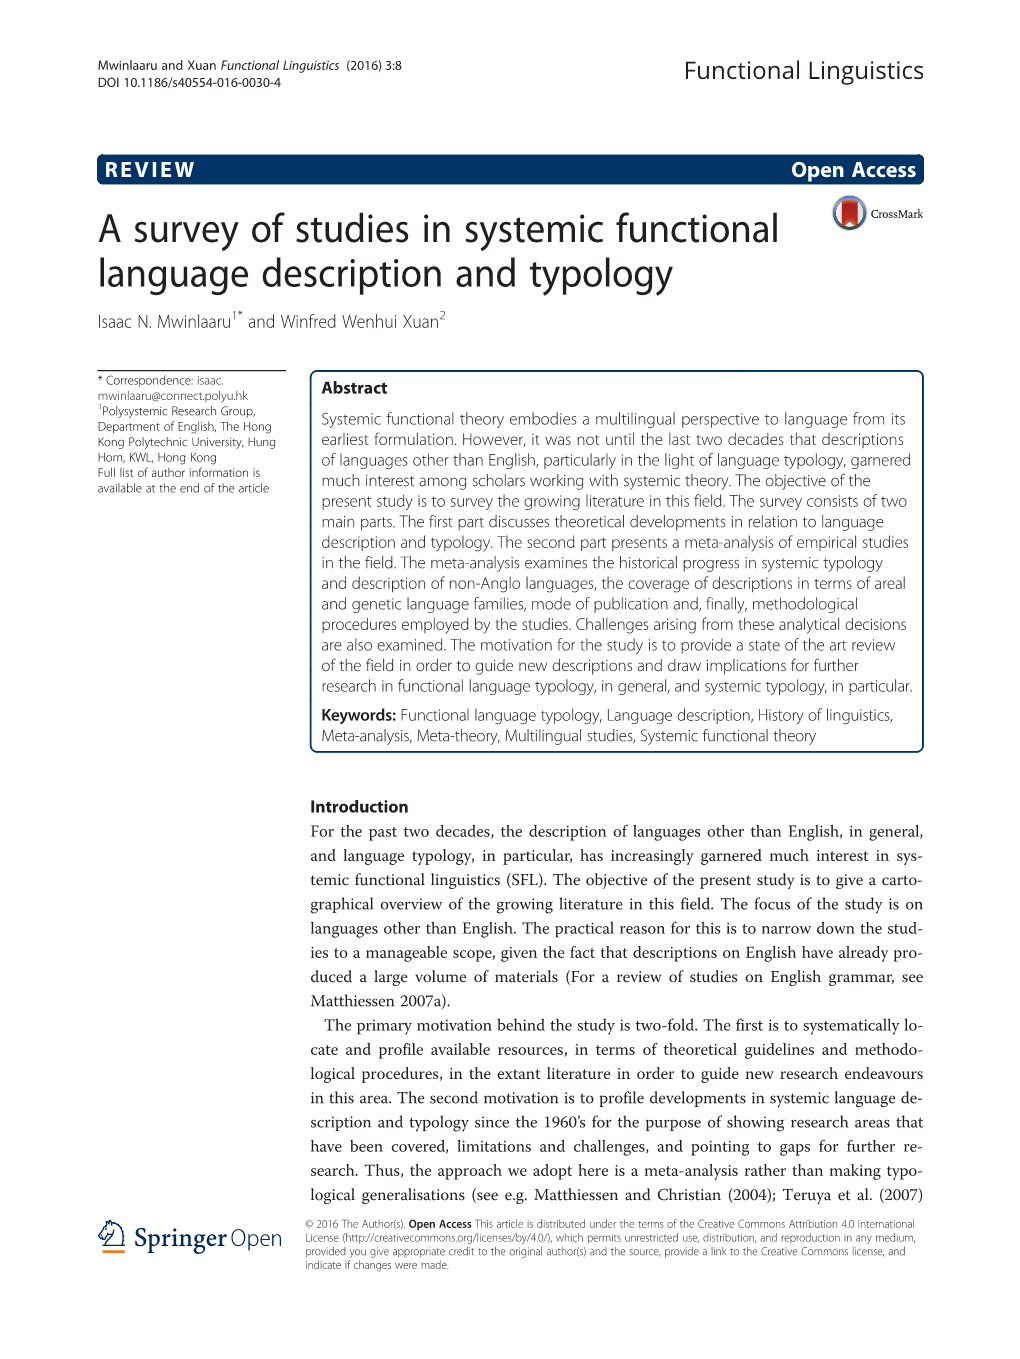 A Survey of Studies in Systemic Functional Language Description and Typology Isaac N